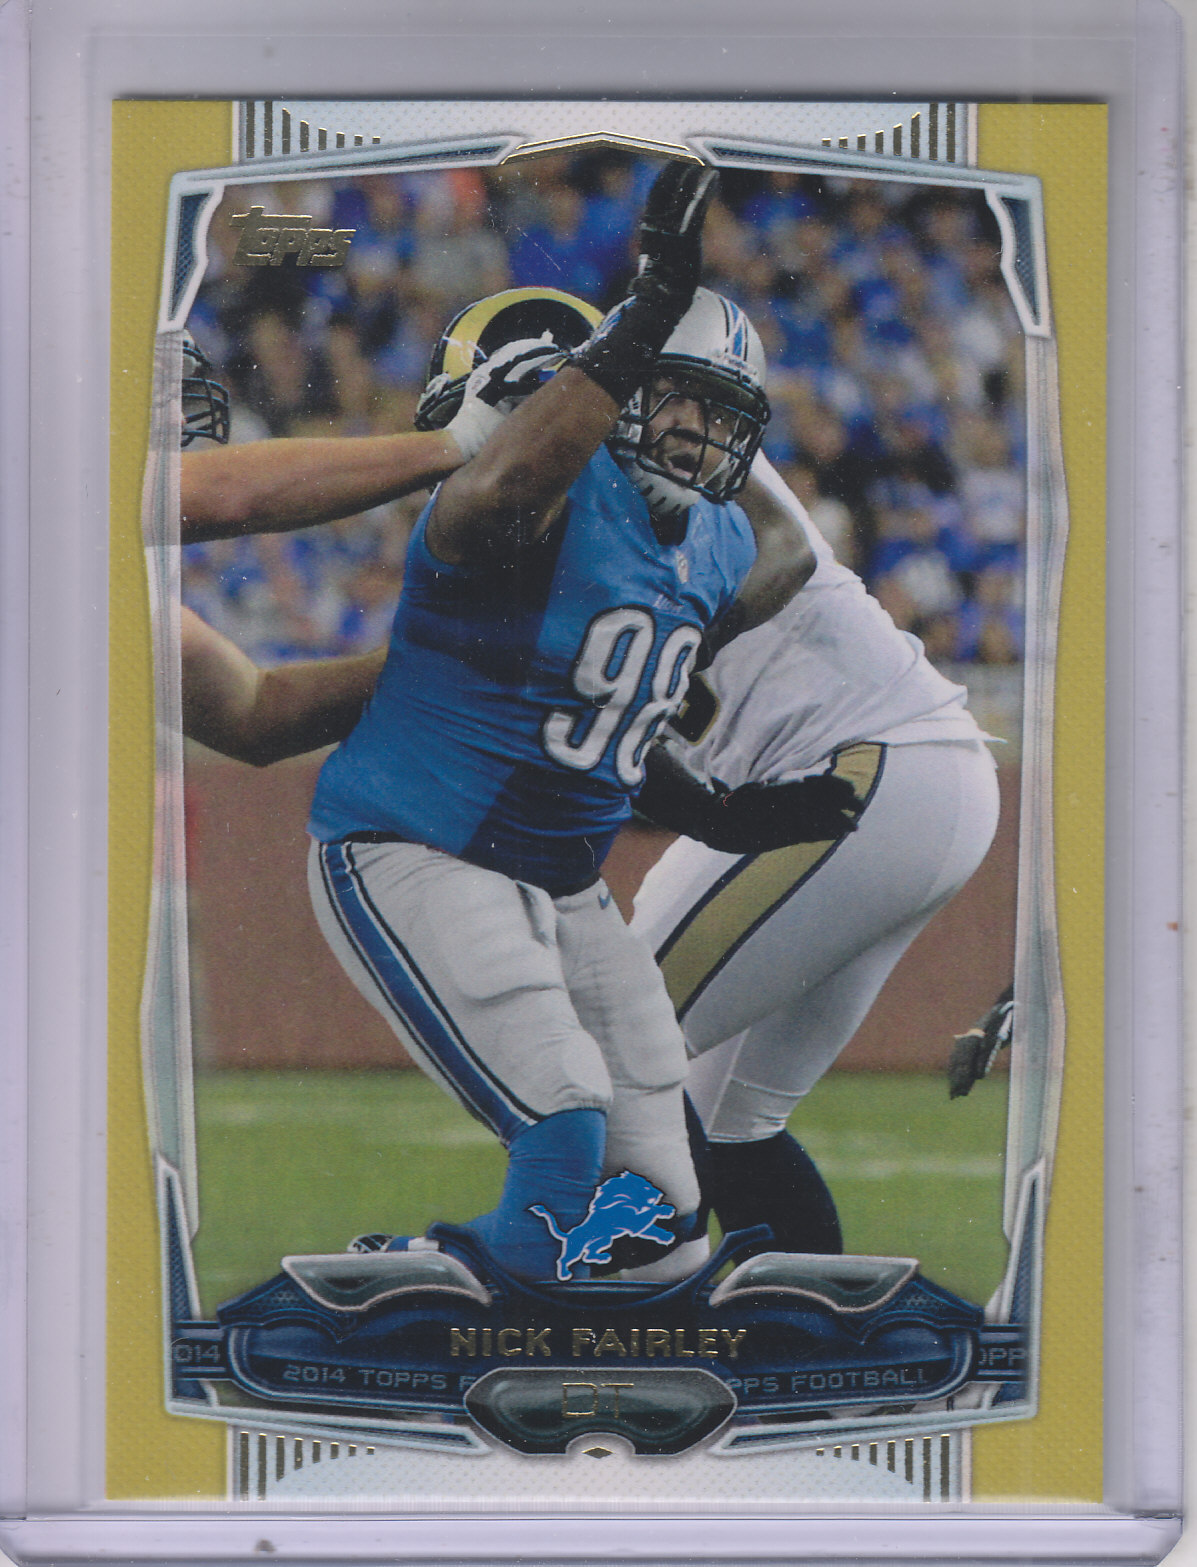 2014 Topps Gold #133 Nick Fairley